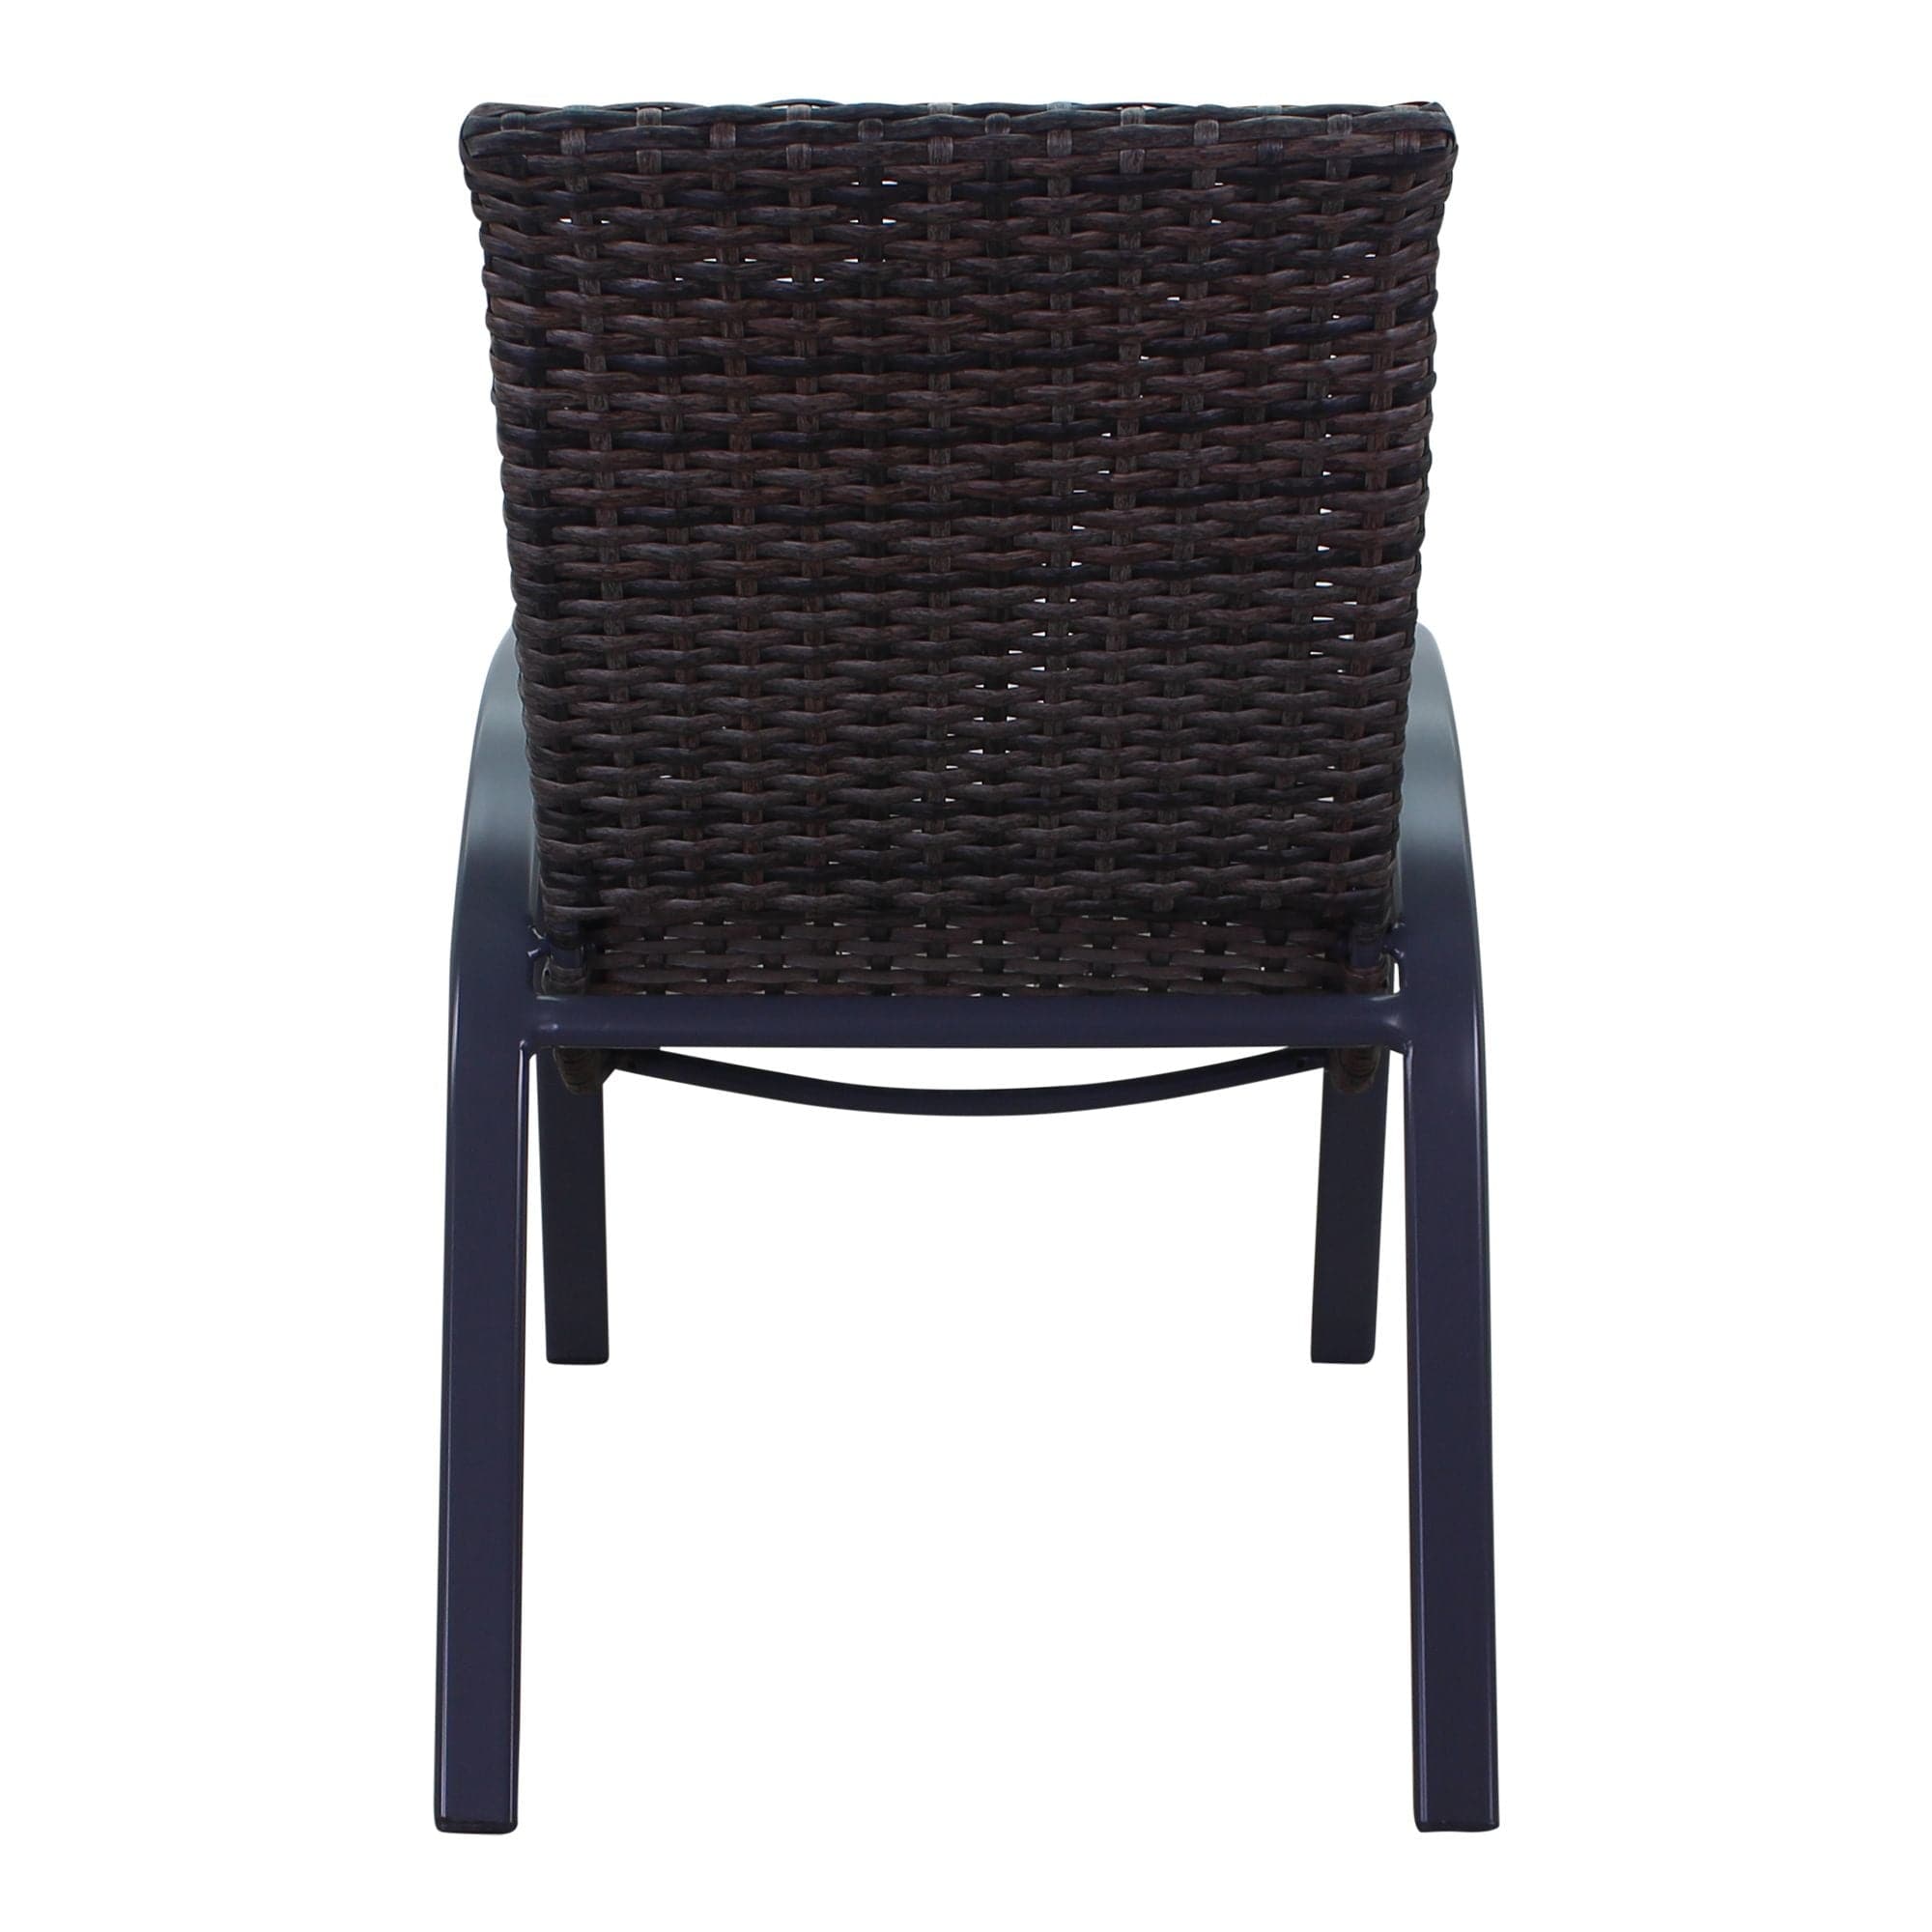 Courtyard Casual Outdoor Dining Set Courtyard Casual -  Santa Fe Dark Gray 7 Piece Mixed Wicker 84" Rectangle Dining Set with 1 Table, 2 Wicker Swivel Rockers and 4 Wicker Chairs | 5909